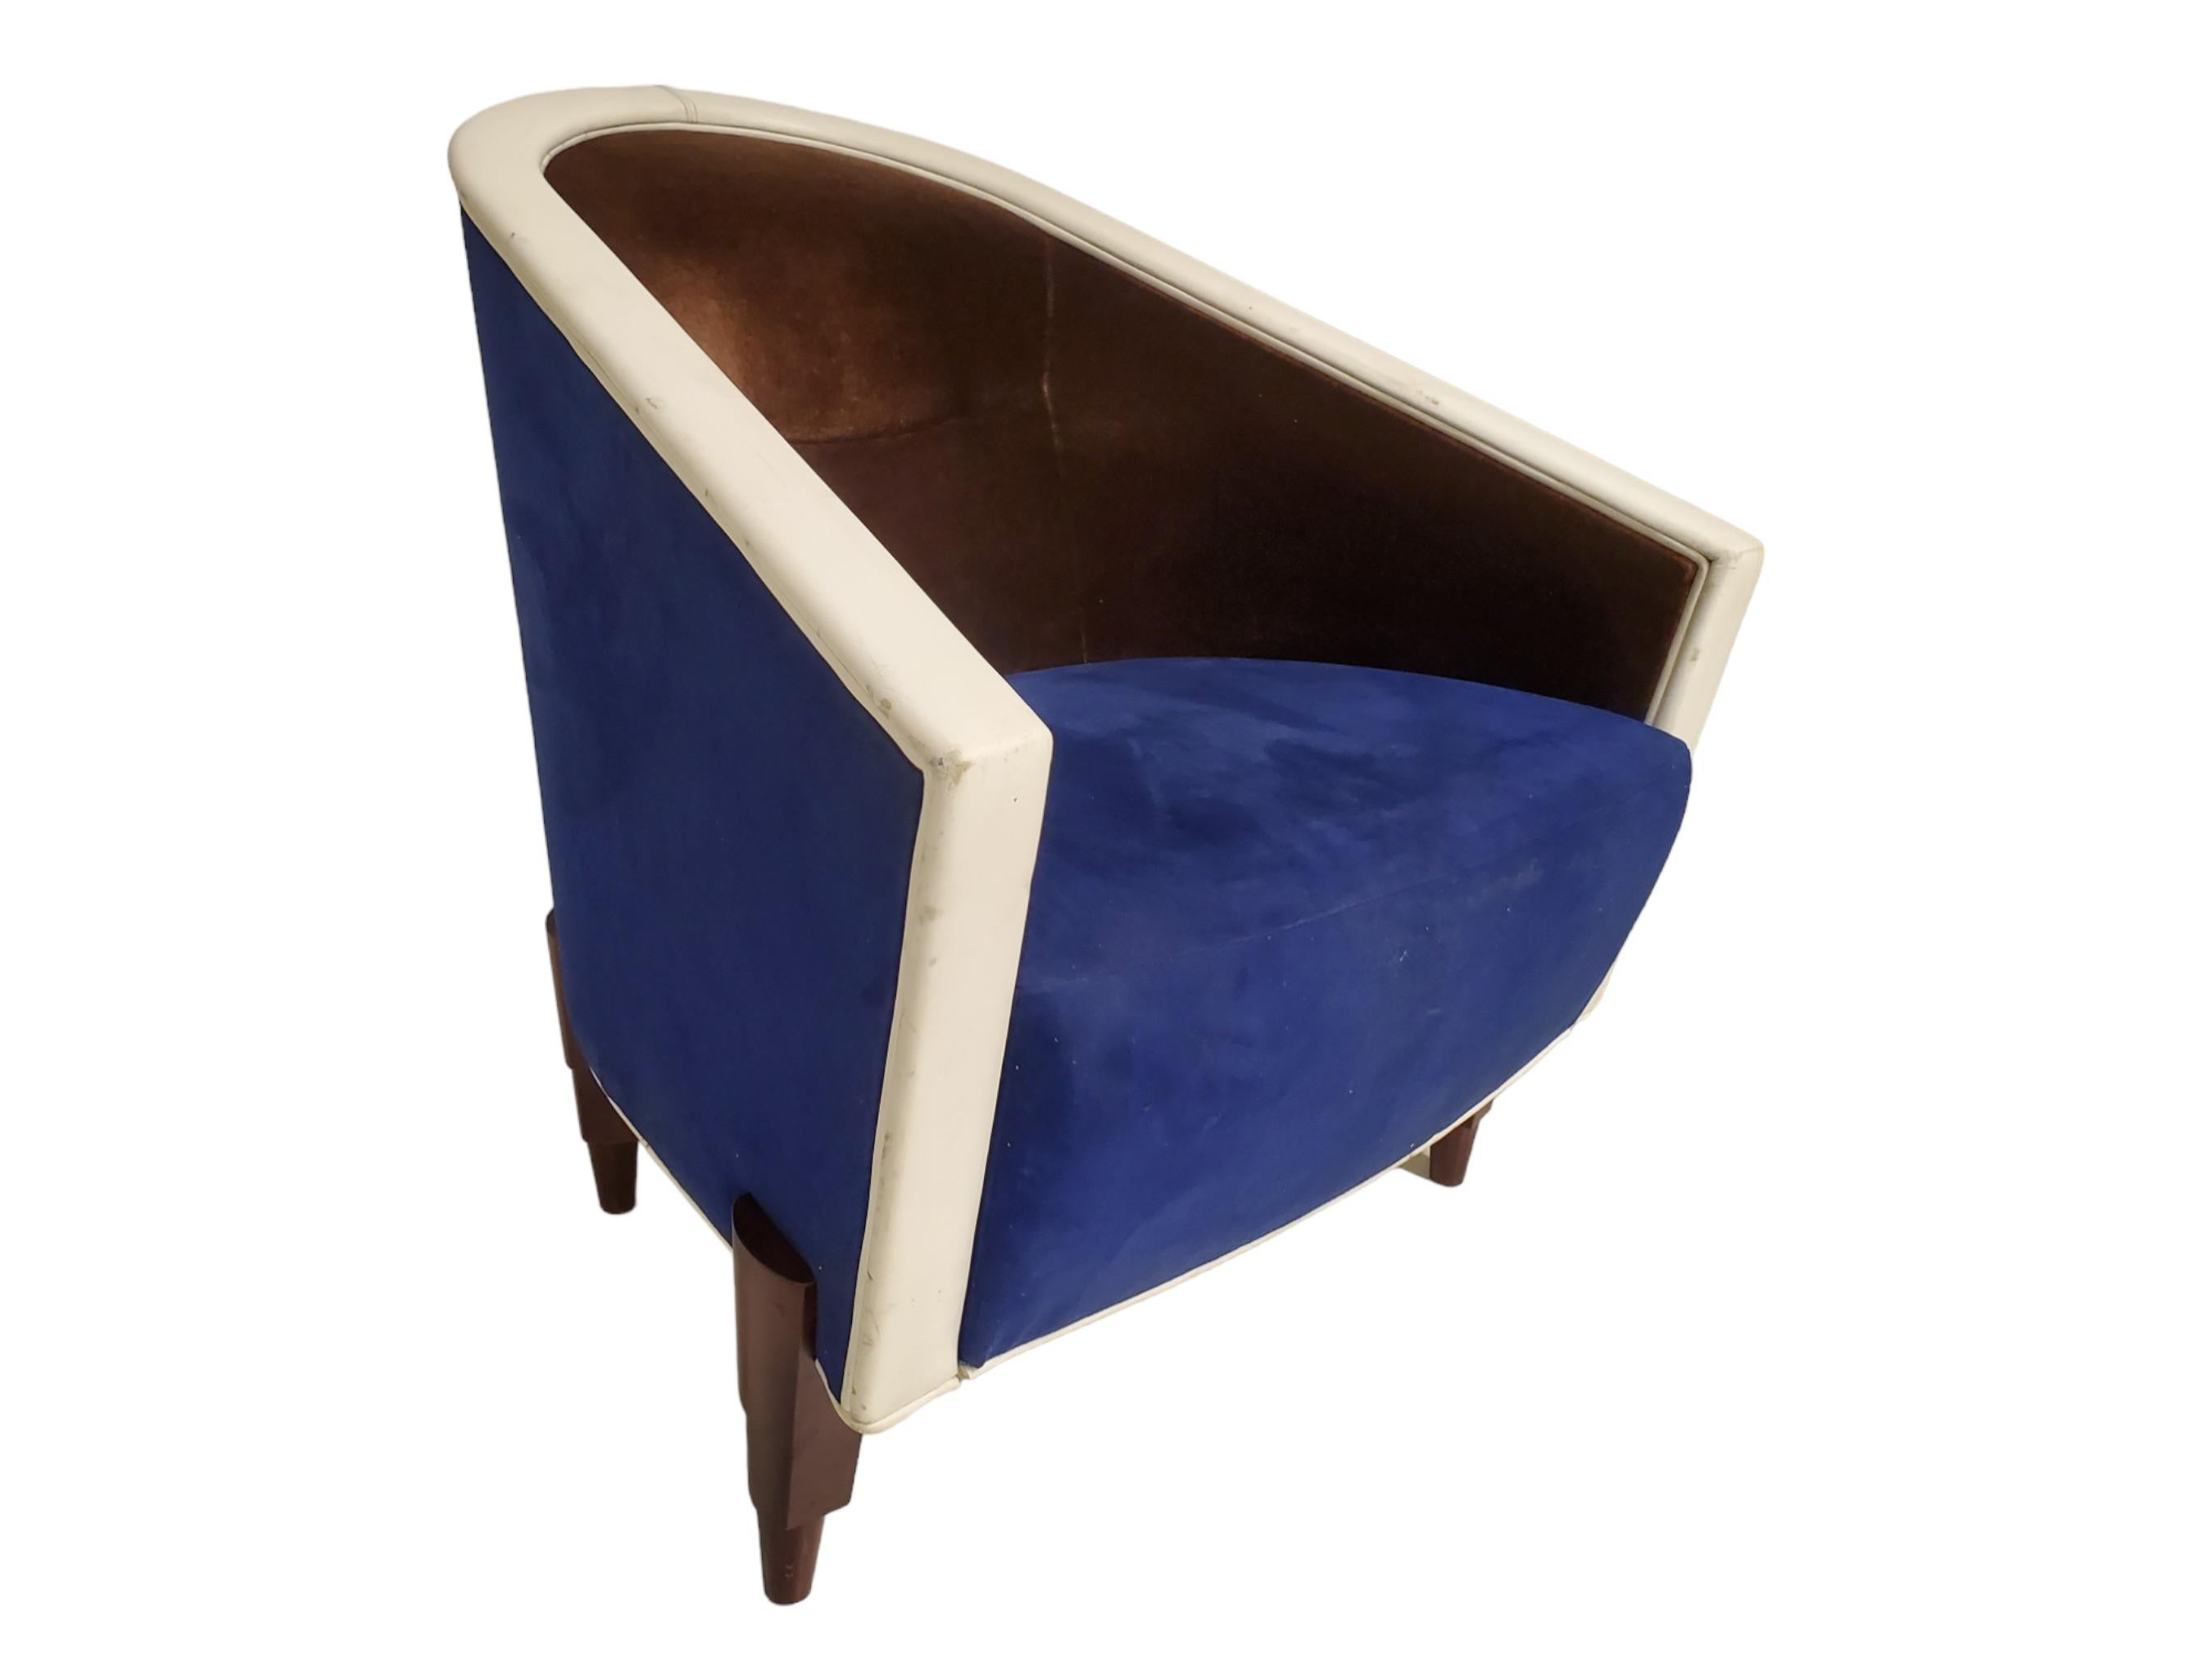  An exquisite and comfortable Italian side chair by Colber International. 
The chair comes from a French hotel near the Champs- Elysees.
 This sculptural club chair boasts a streamlined design, wrapped in a luxurious blend of cobalt blue and mocha